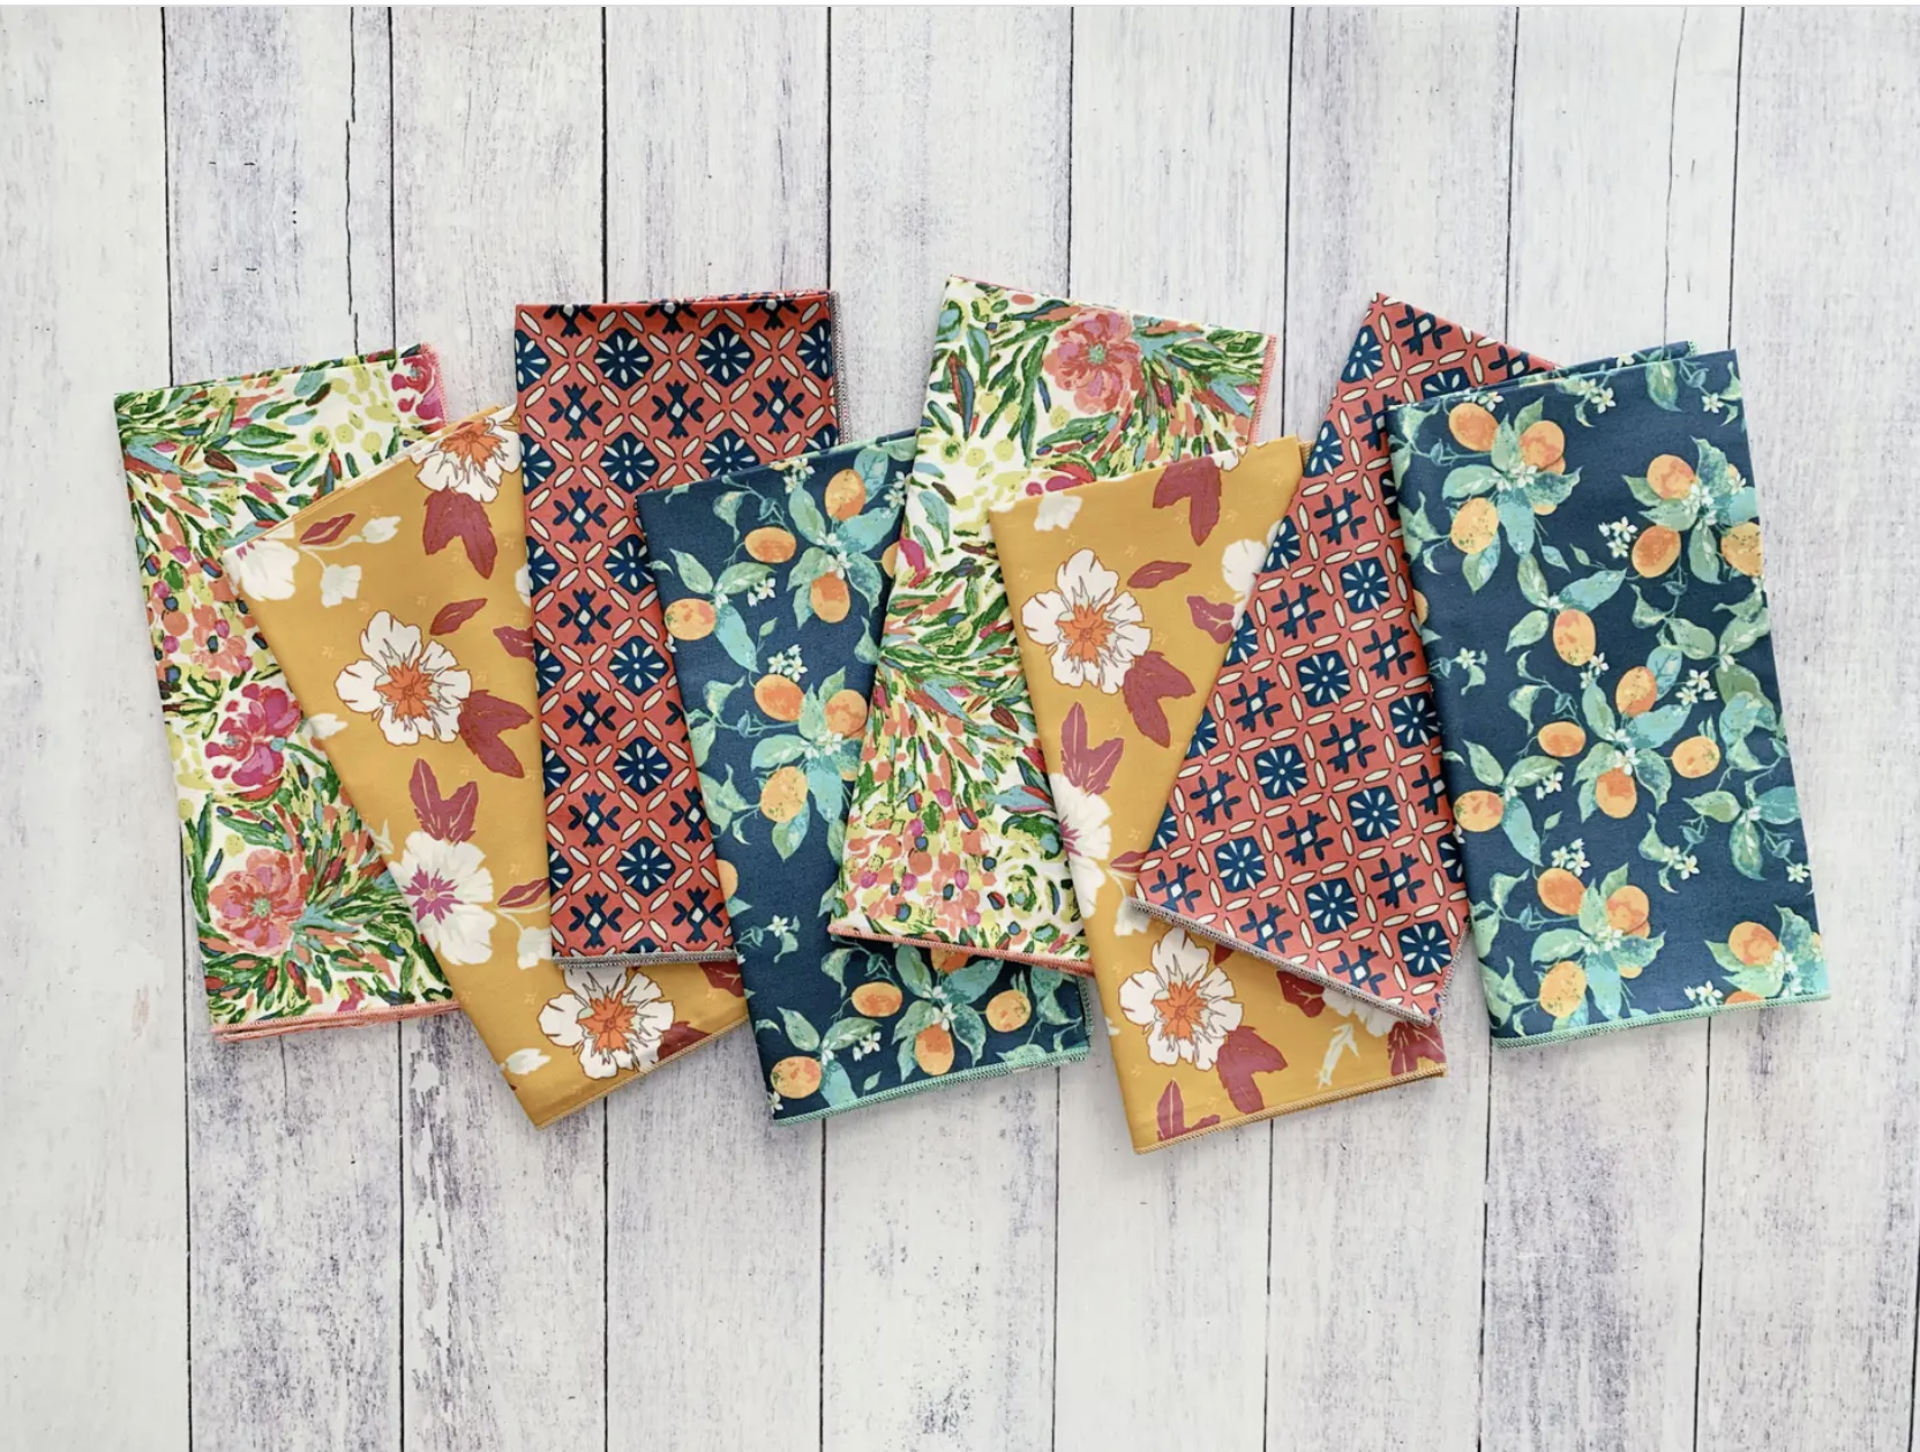 Botanica Cloth Napkin, set of 8 by Dot and Army